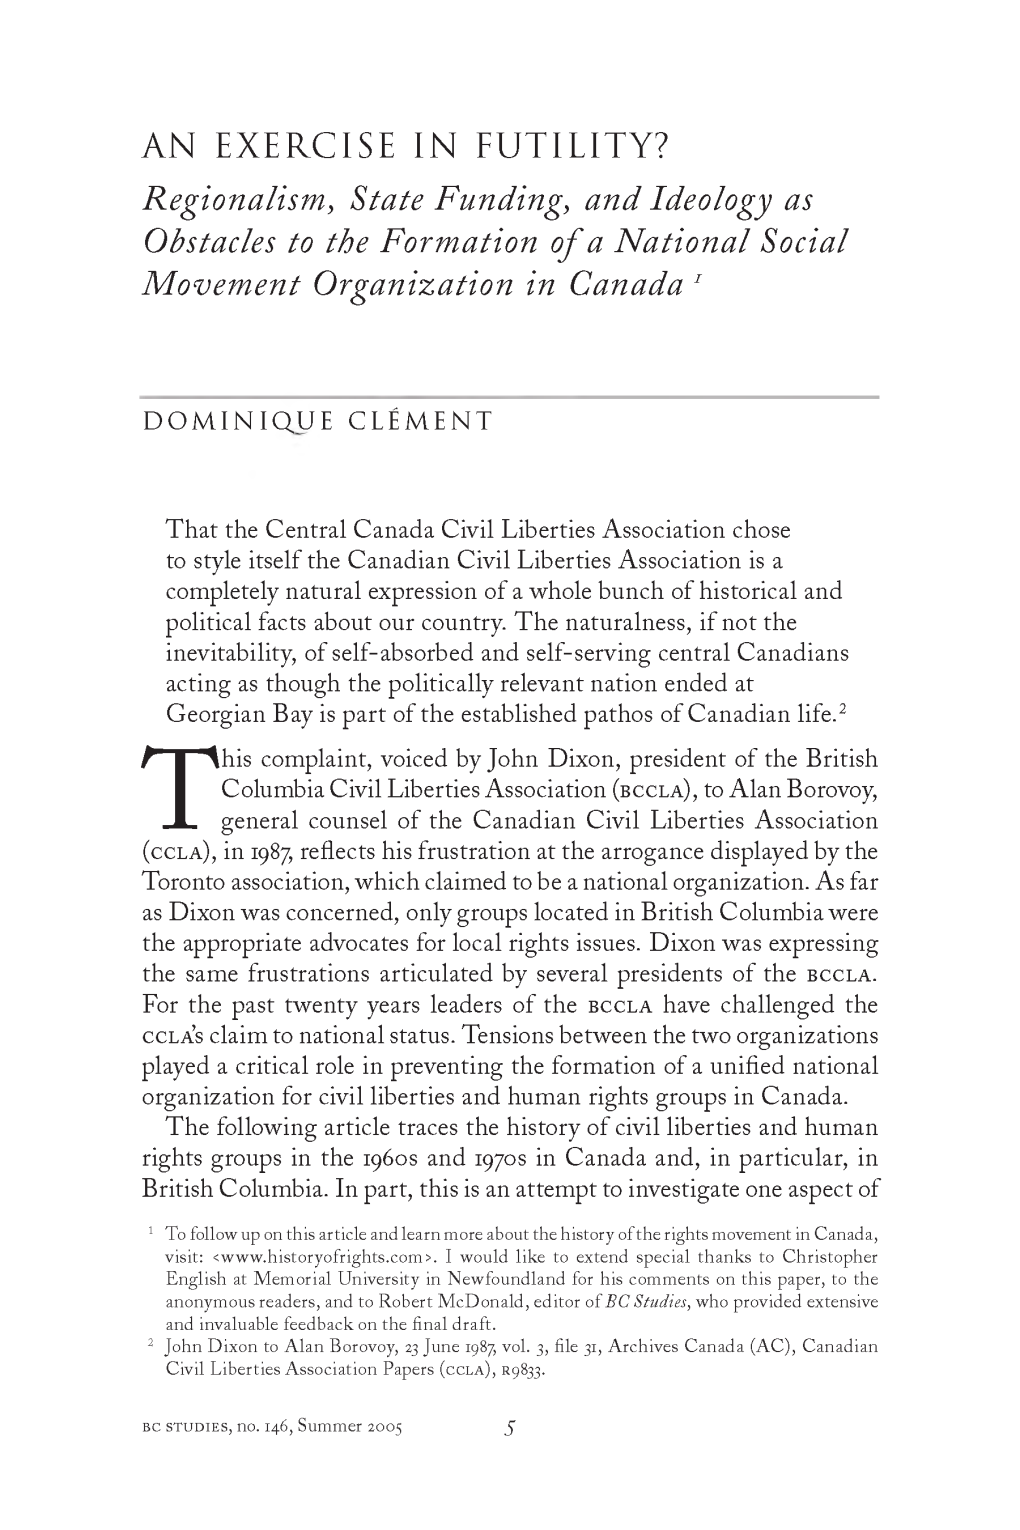 Regionalism, State Funding, and Ideology As Obstacles to the Formation of a National Social Movement Organization in Canada 1